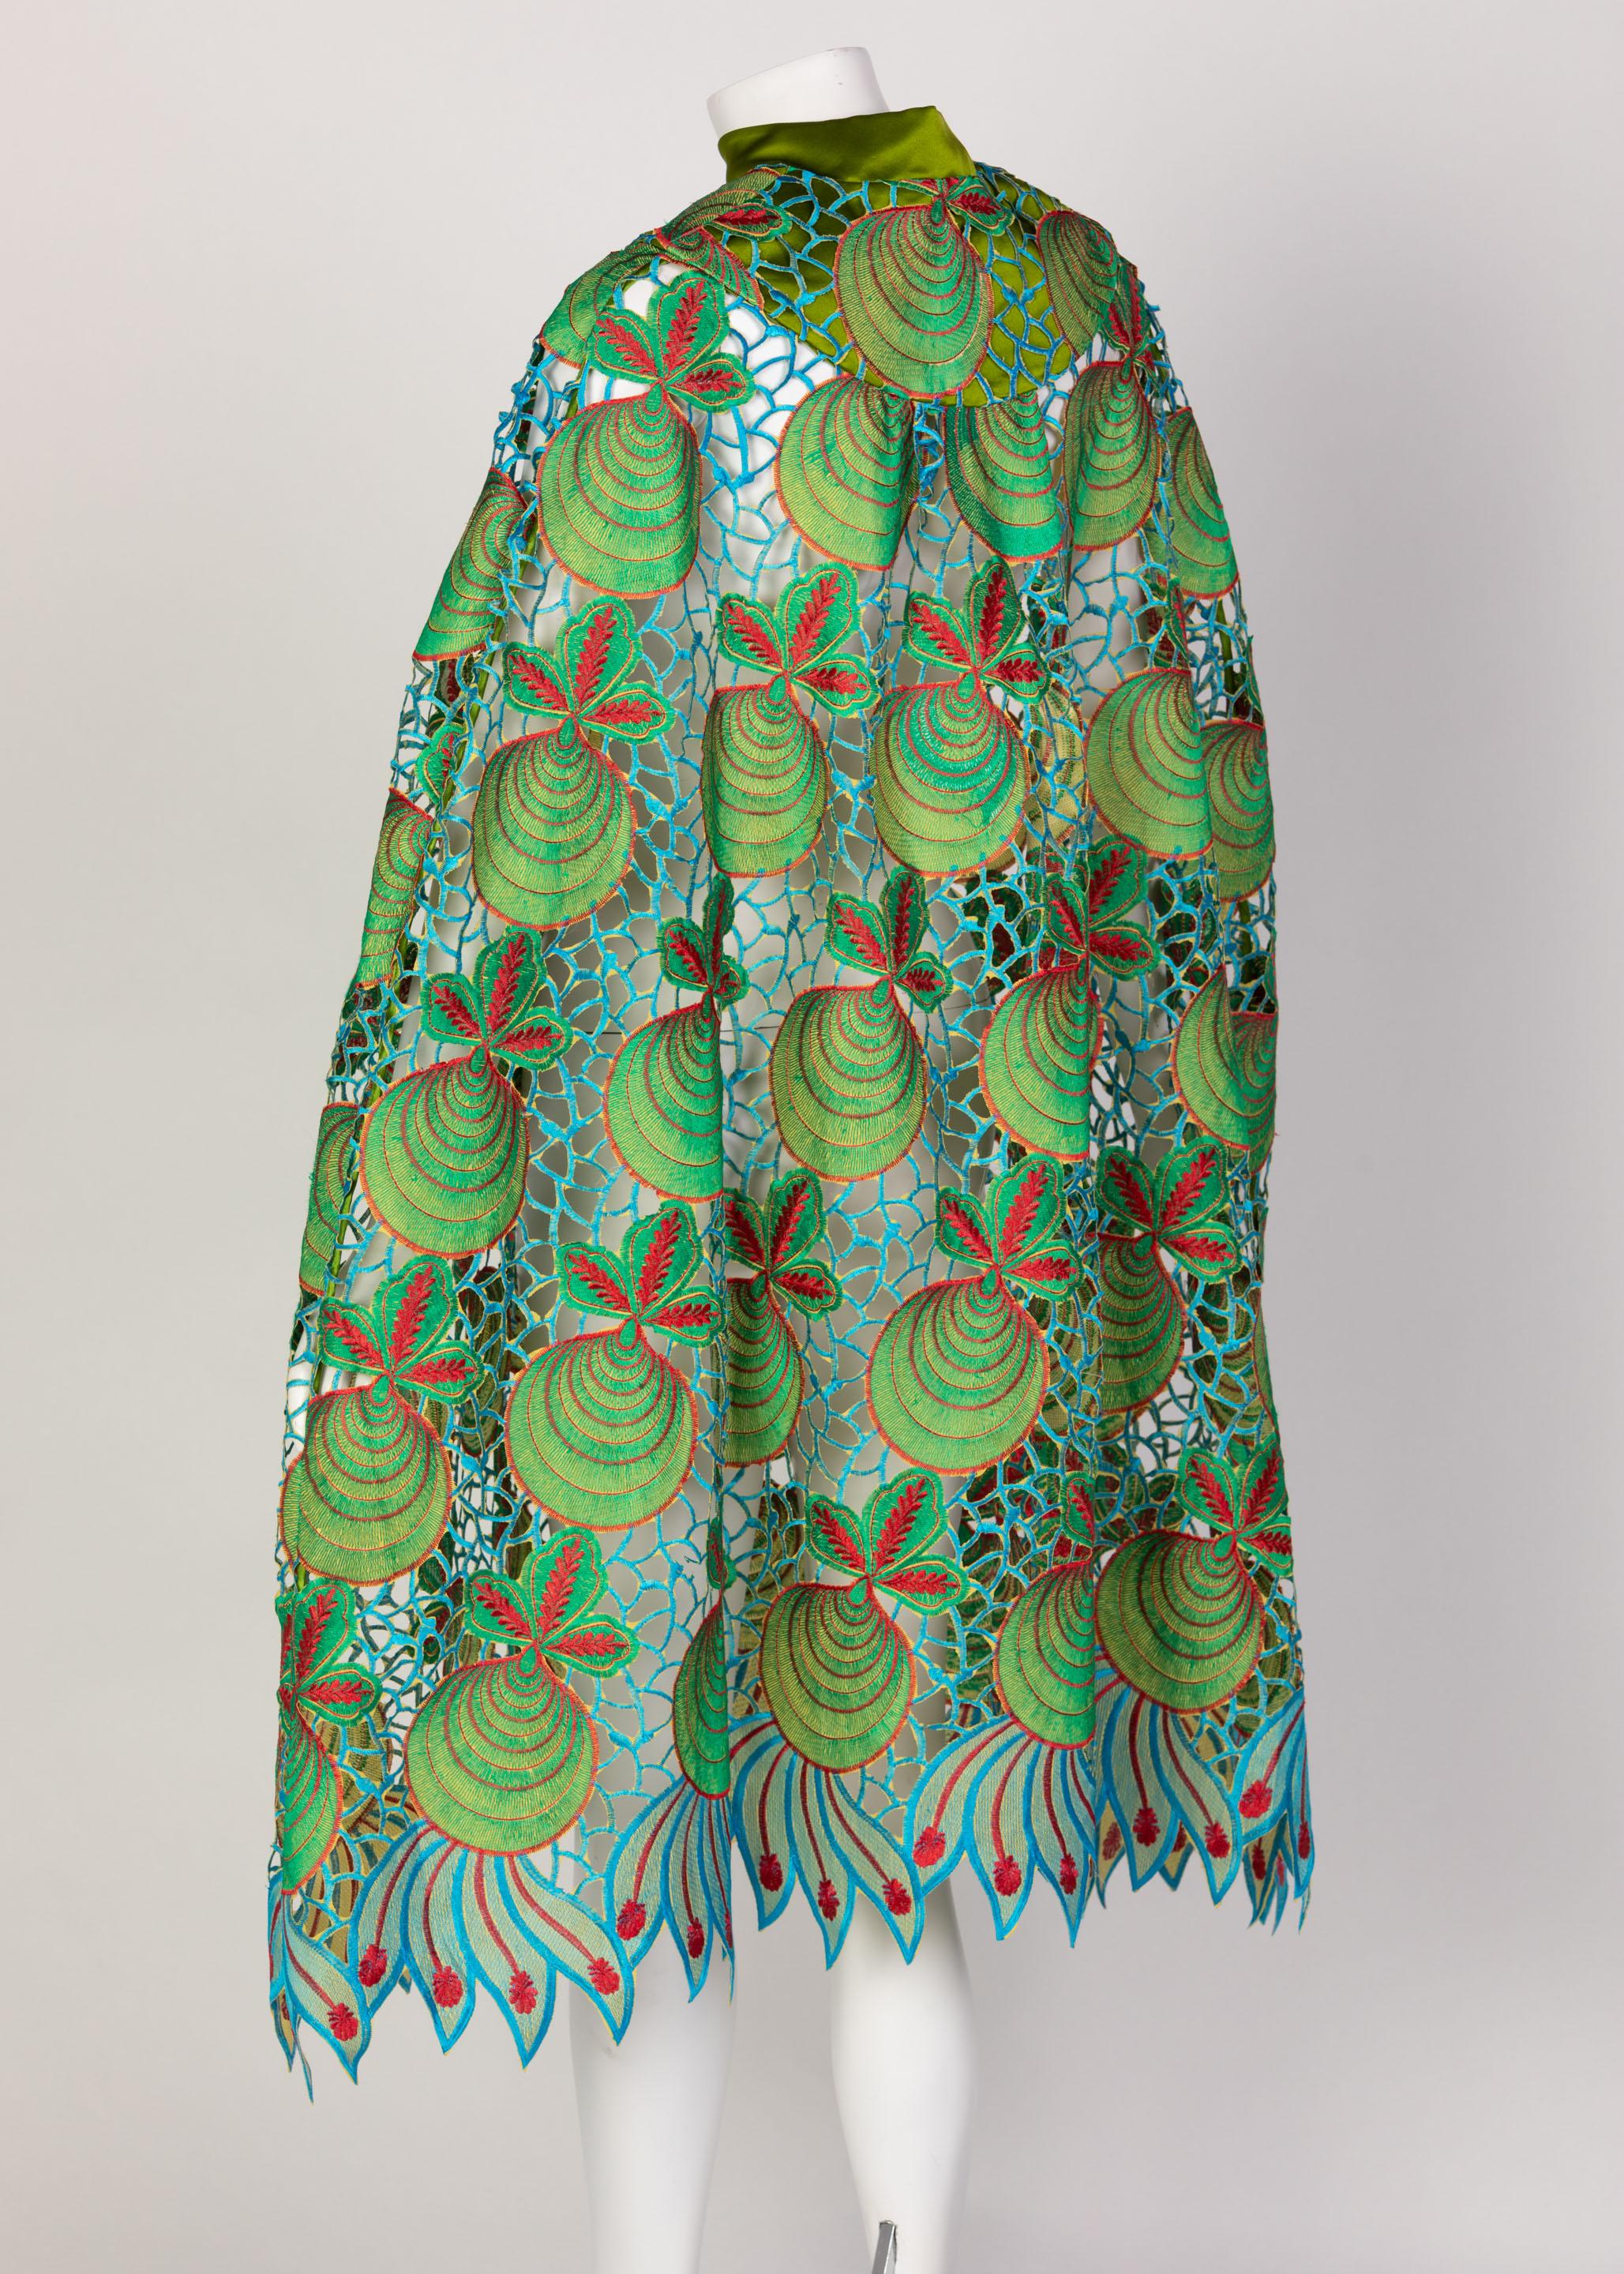 Duro Olowu Green Blue Red Cut Out Silk Lace Cape, 2012 For Sale 3